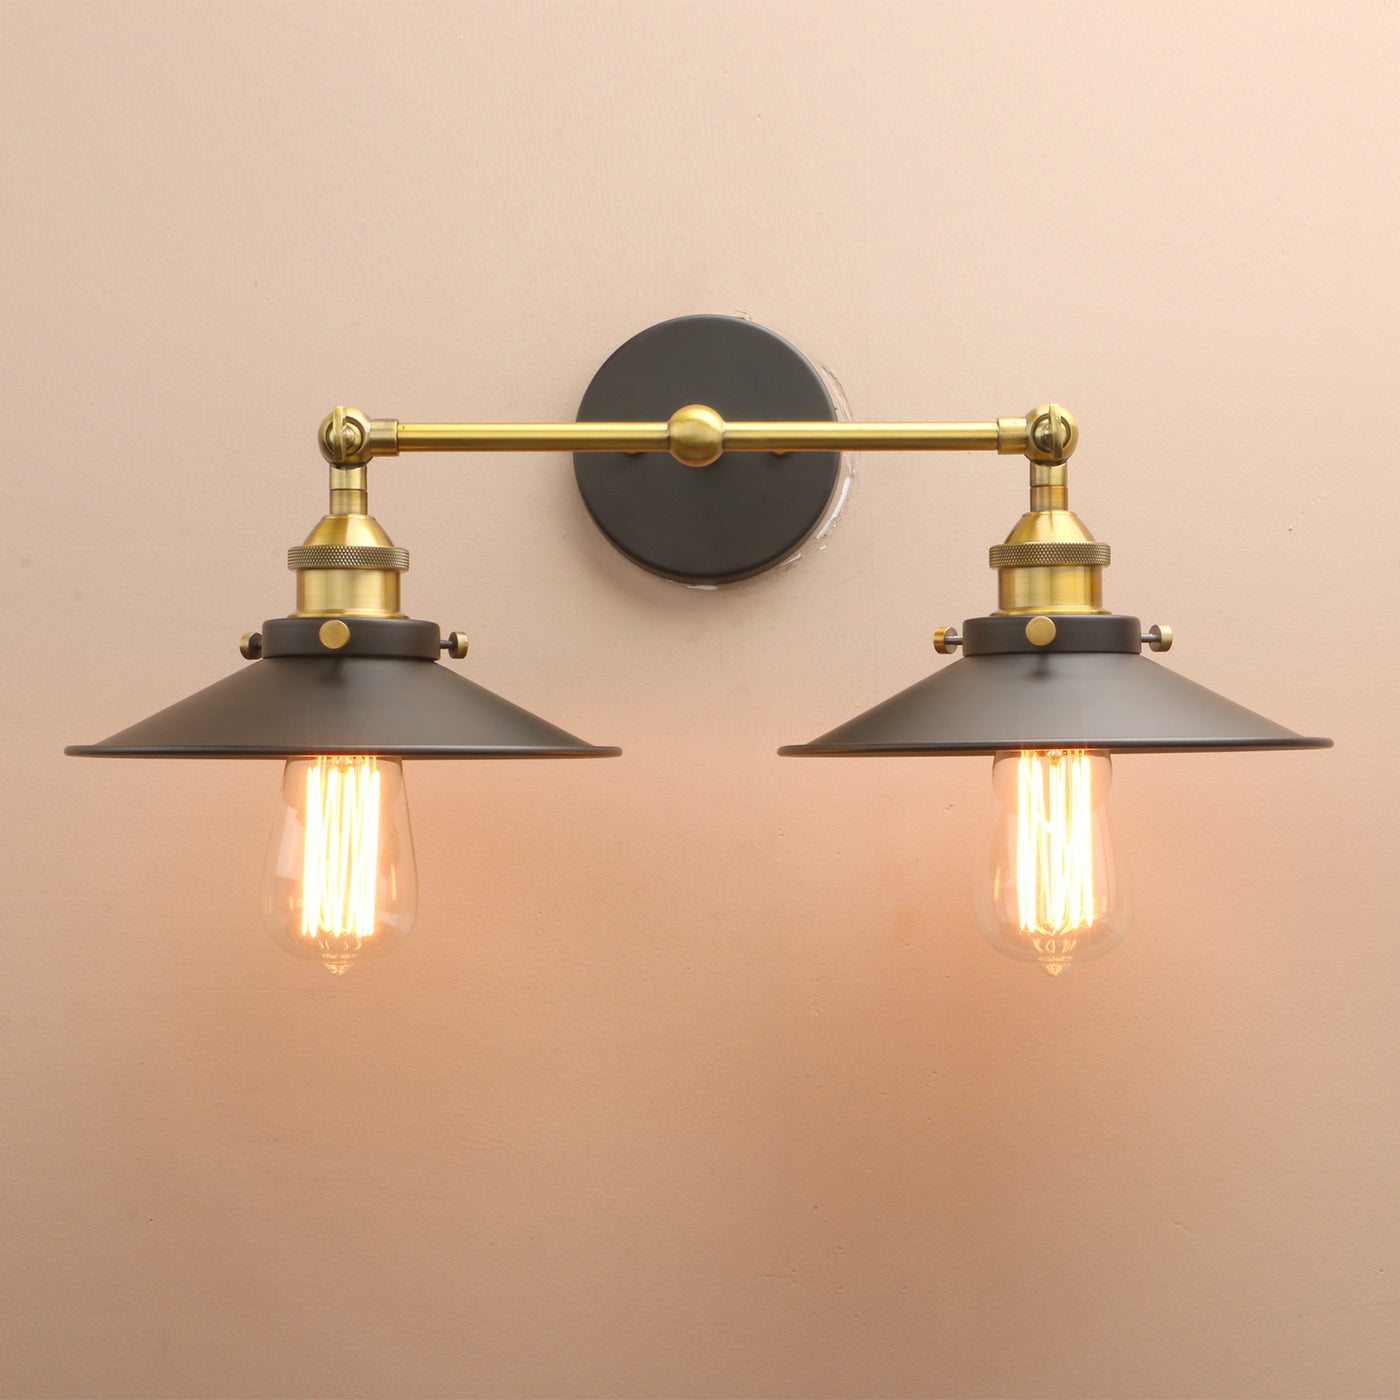 Comme Duo Wall Light - Affluent Interior Wall Lights